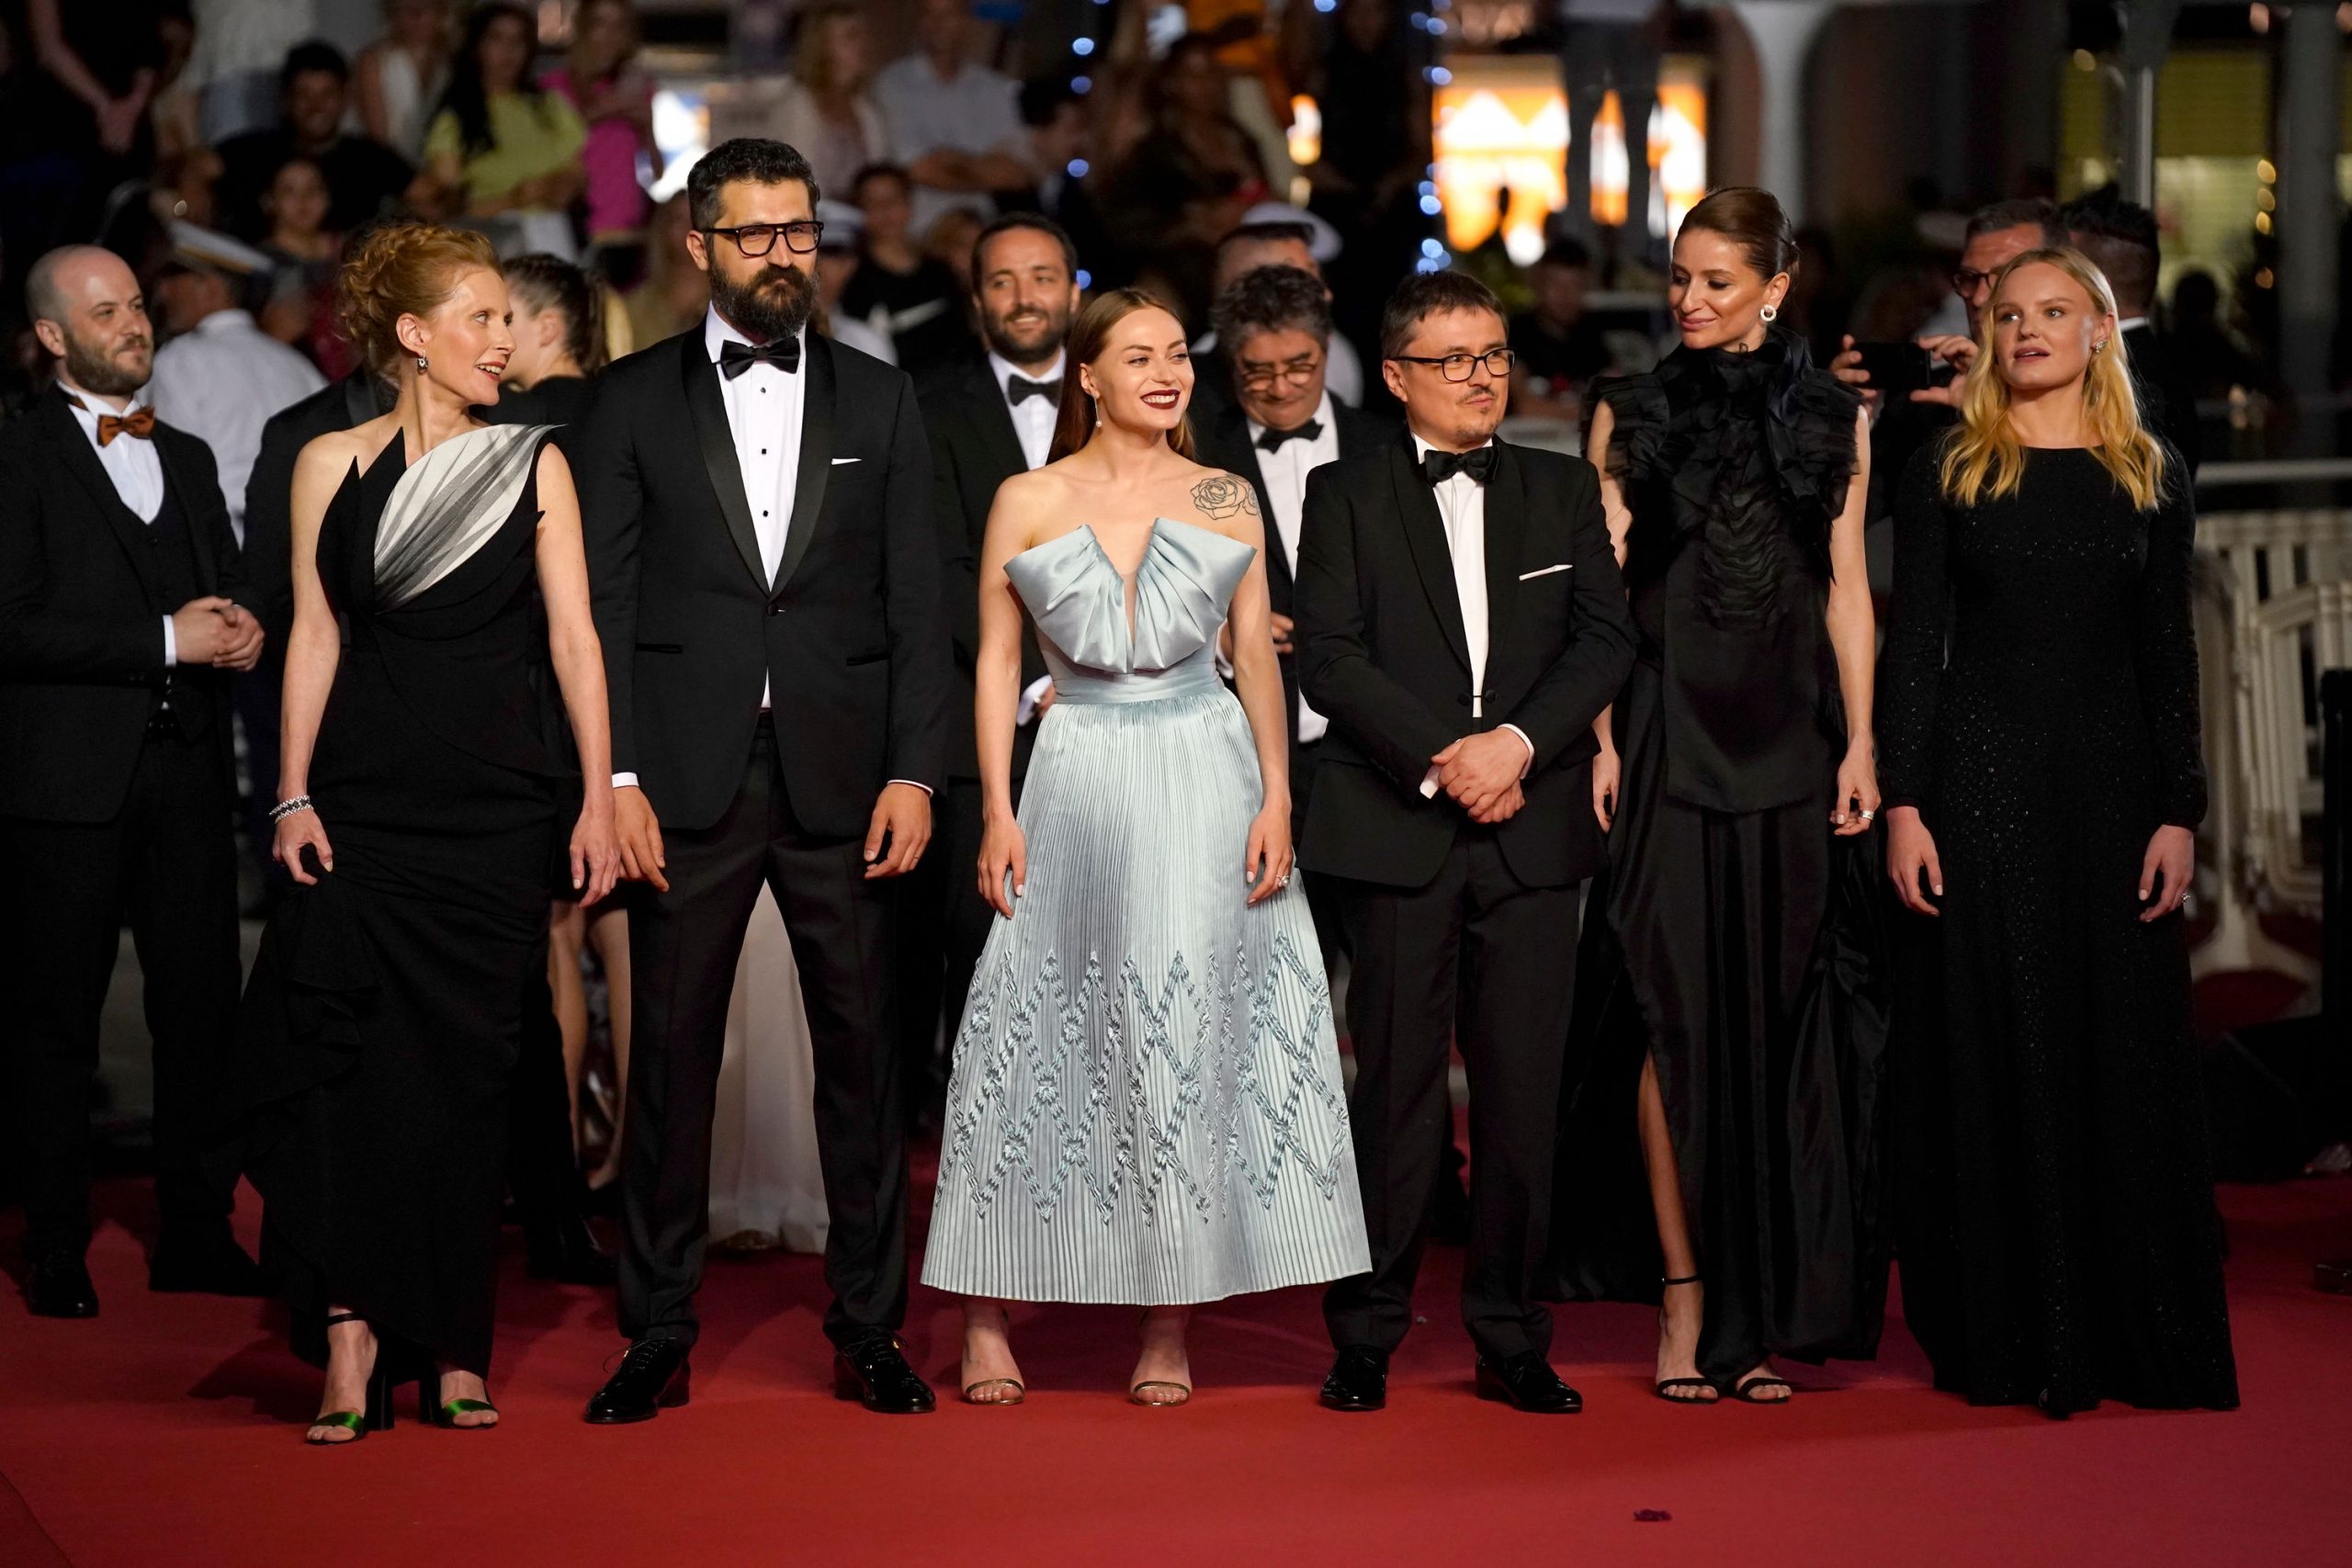 Cannes all set to wrap with presentation of Palme d’Or on Saturday